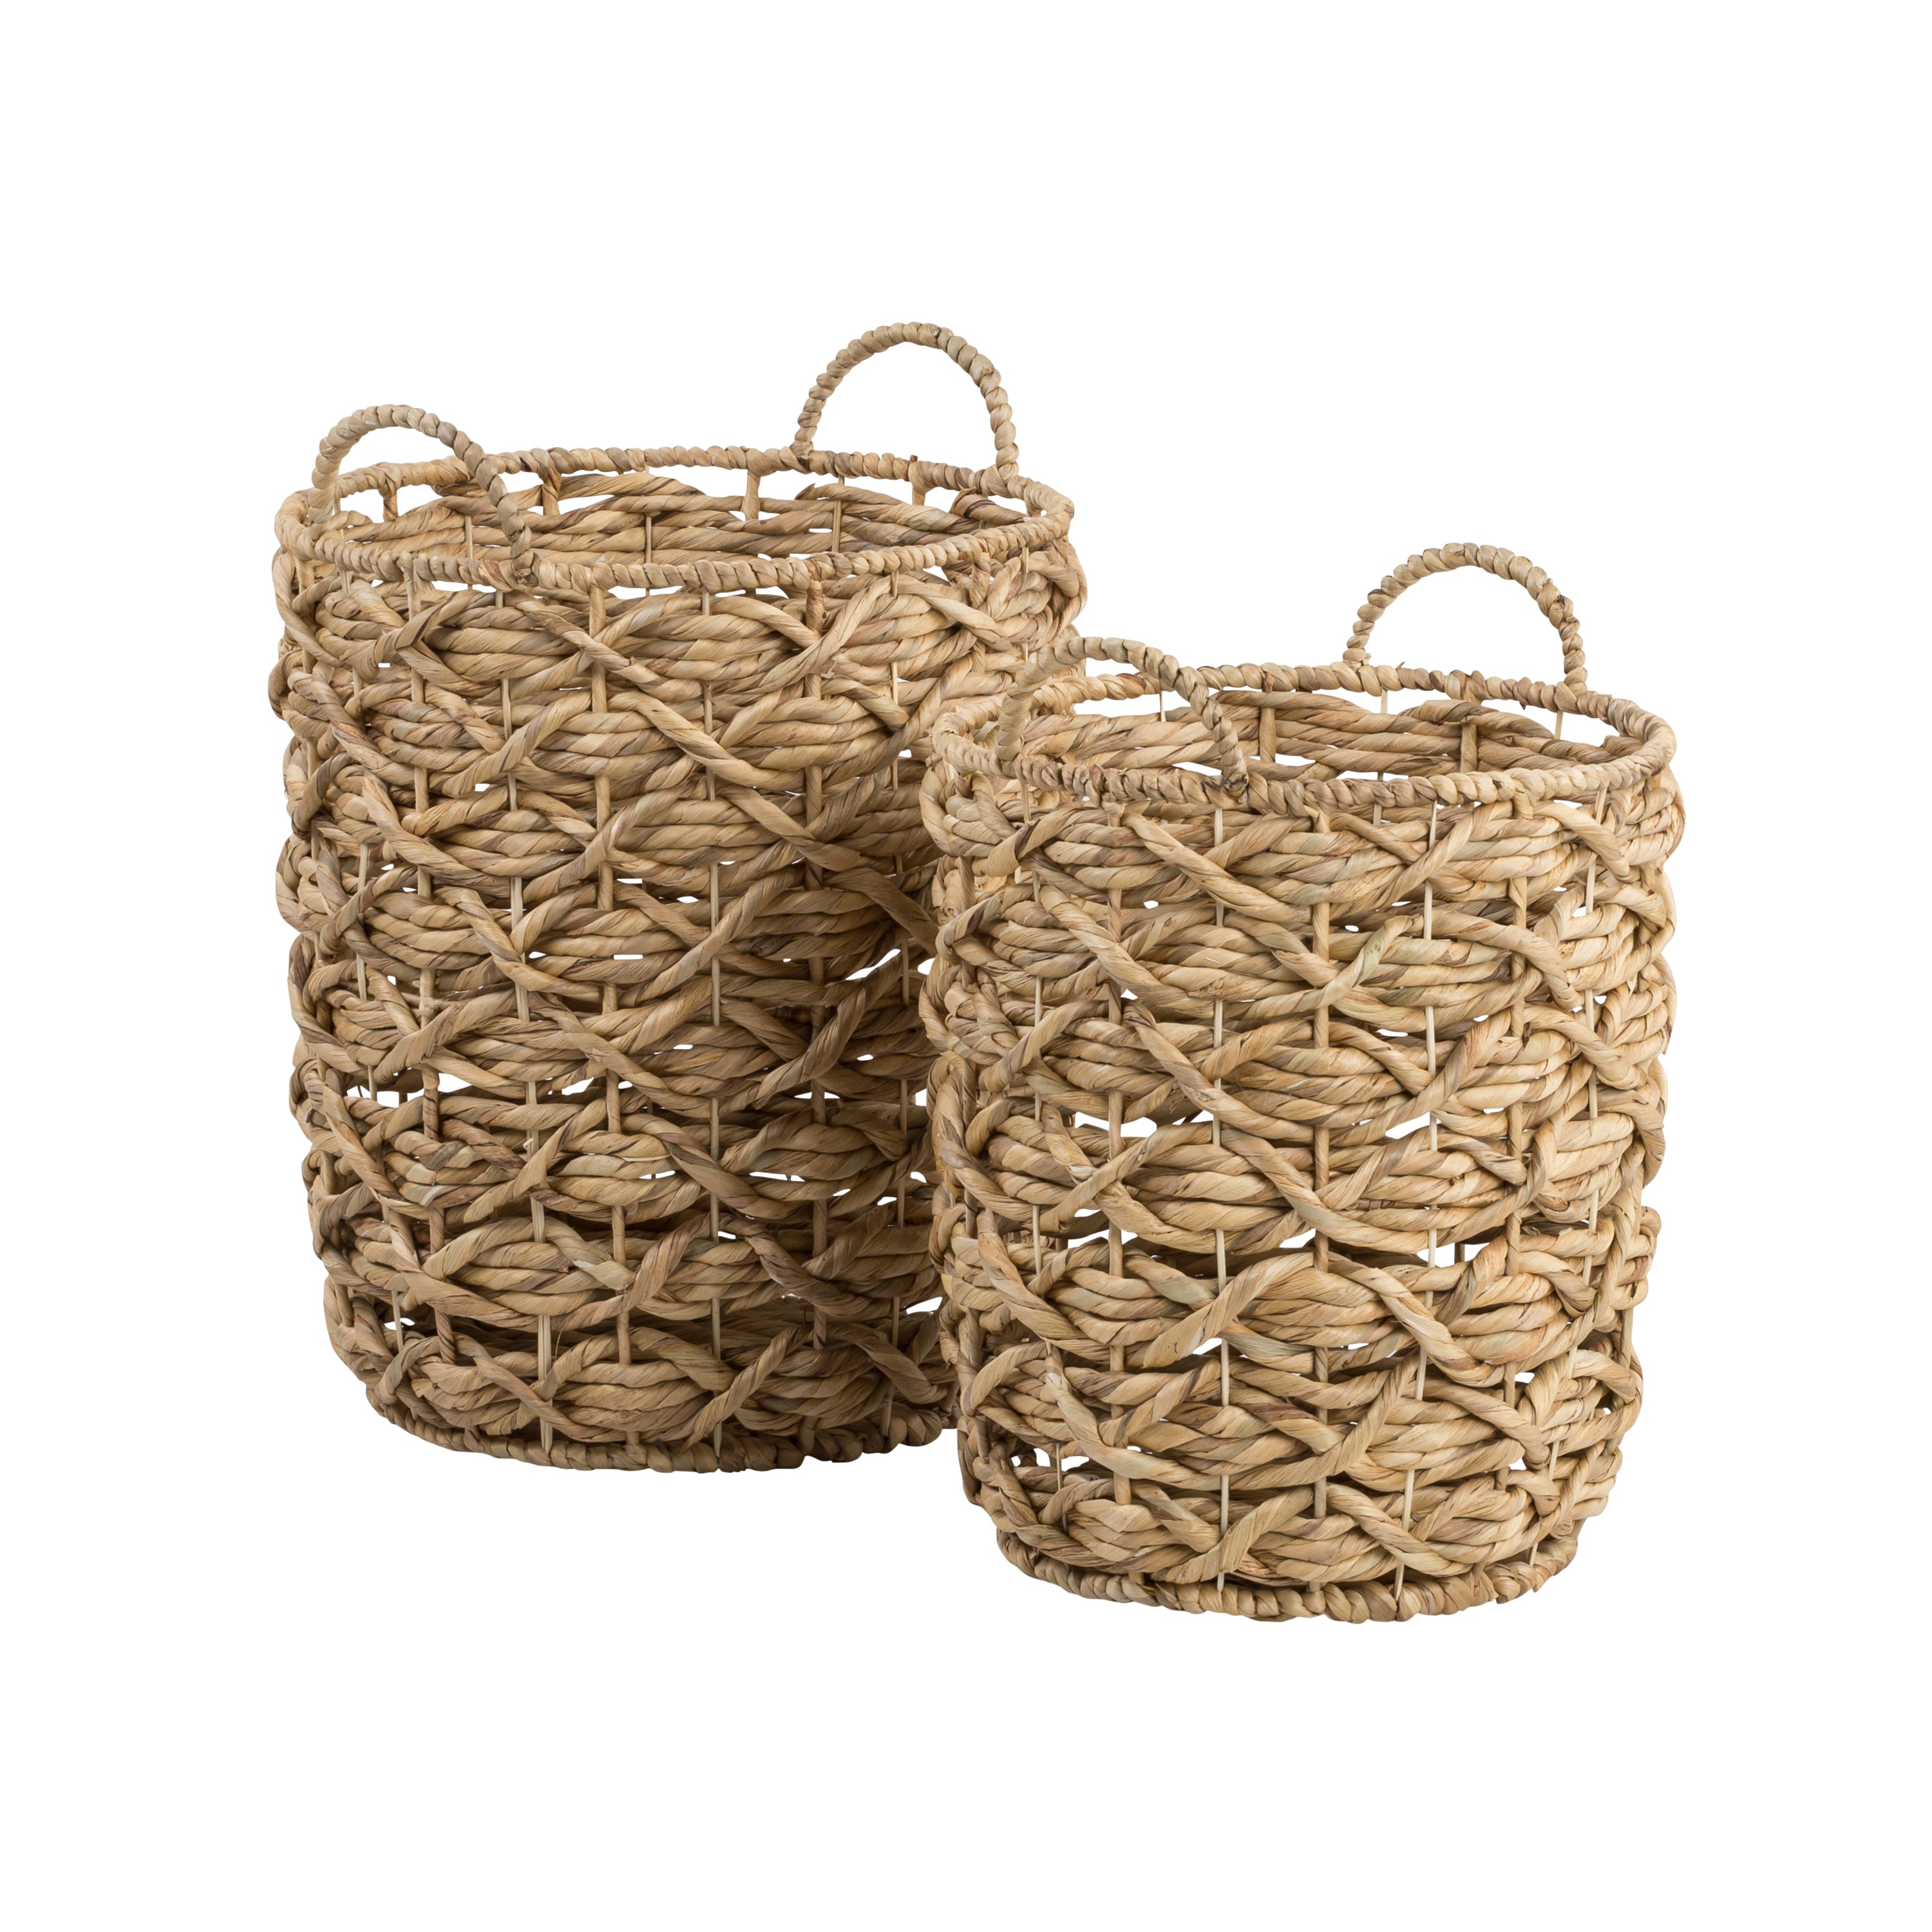 Explore our White/Natural Seagrass Round Nesting Baskets (Set of 3)  honeycando.com Cheap, Discount Online collection and be inspired. Get them  now